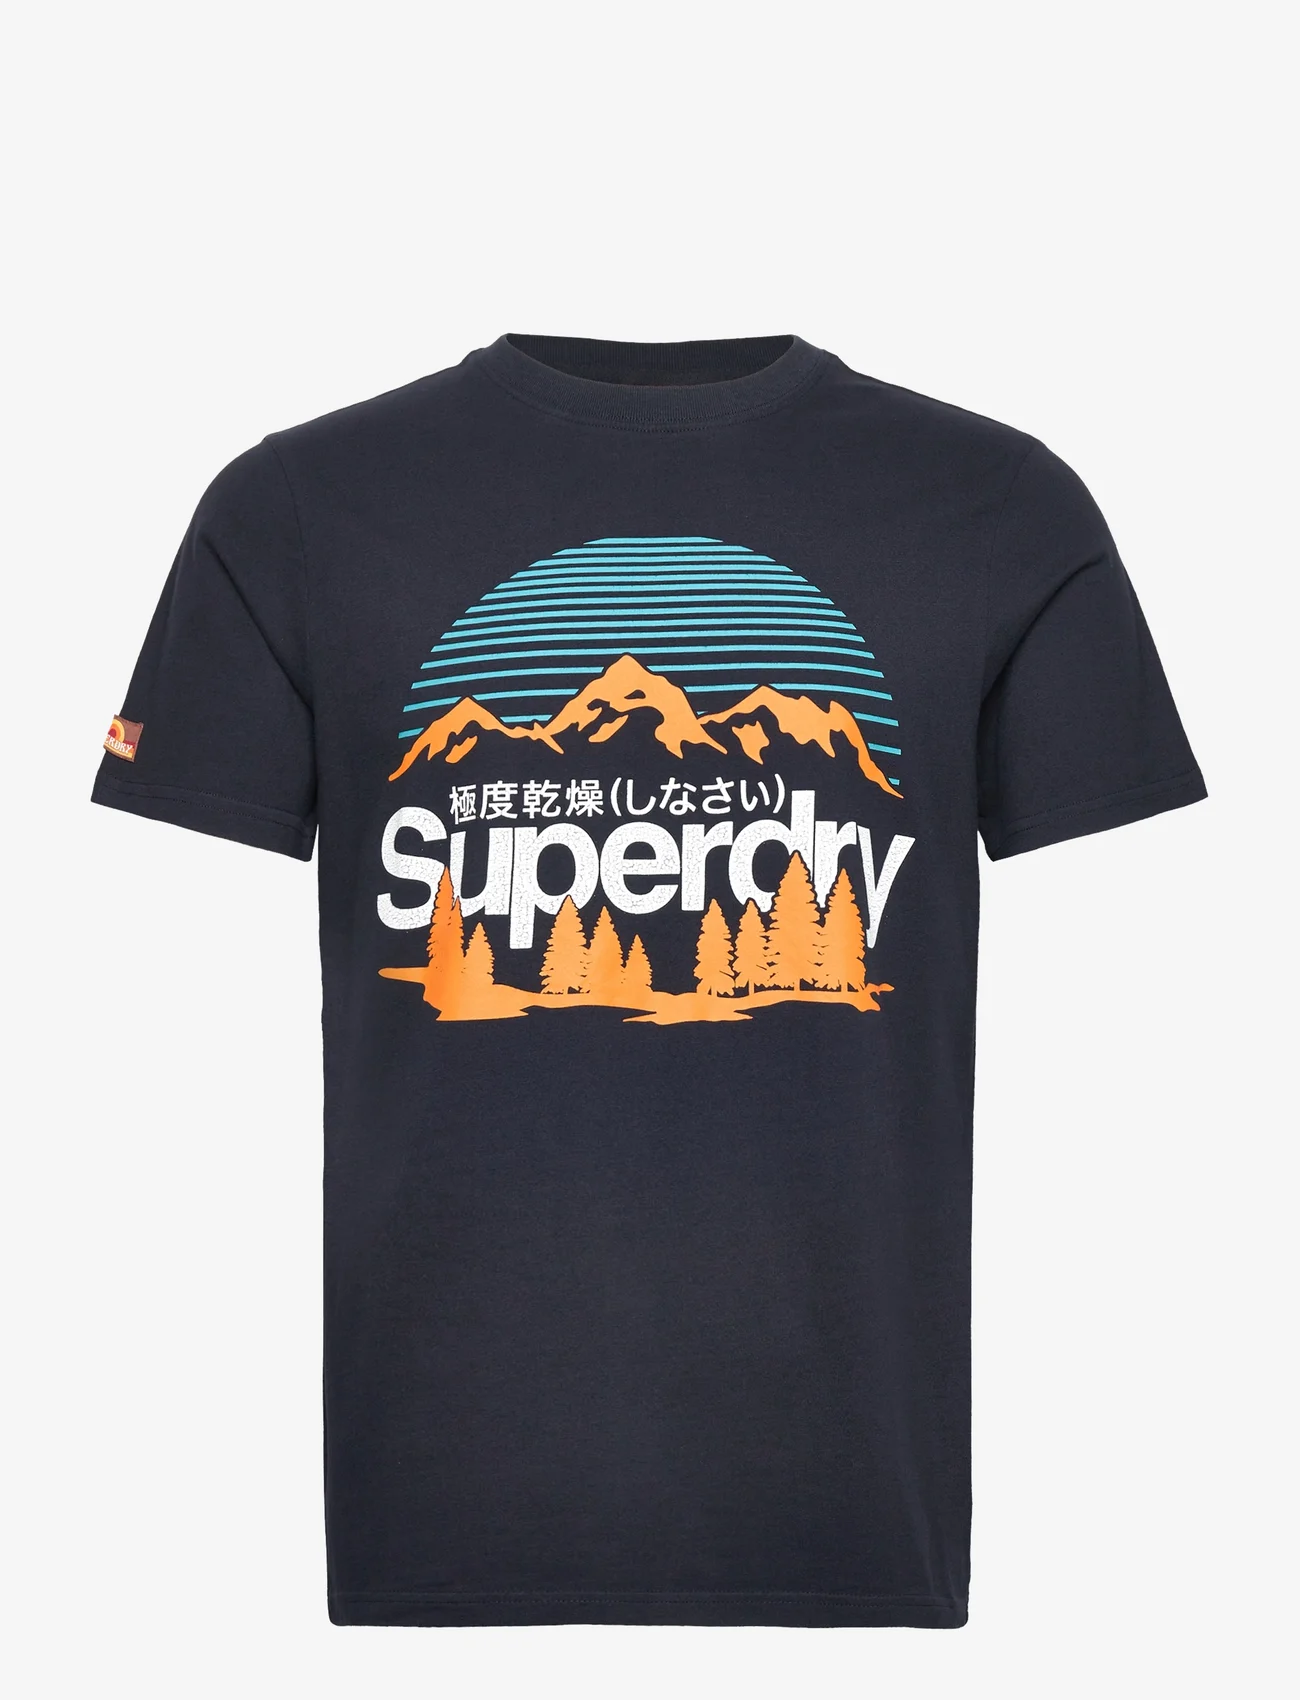 Superdry - GREAT OUTDOORS NR GRAPHIC TEE - laveste priser - eclipse navy - 0